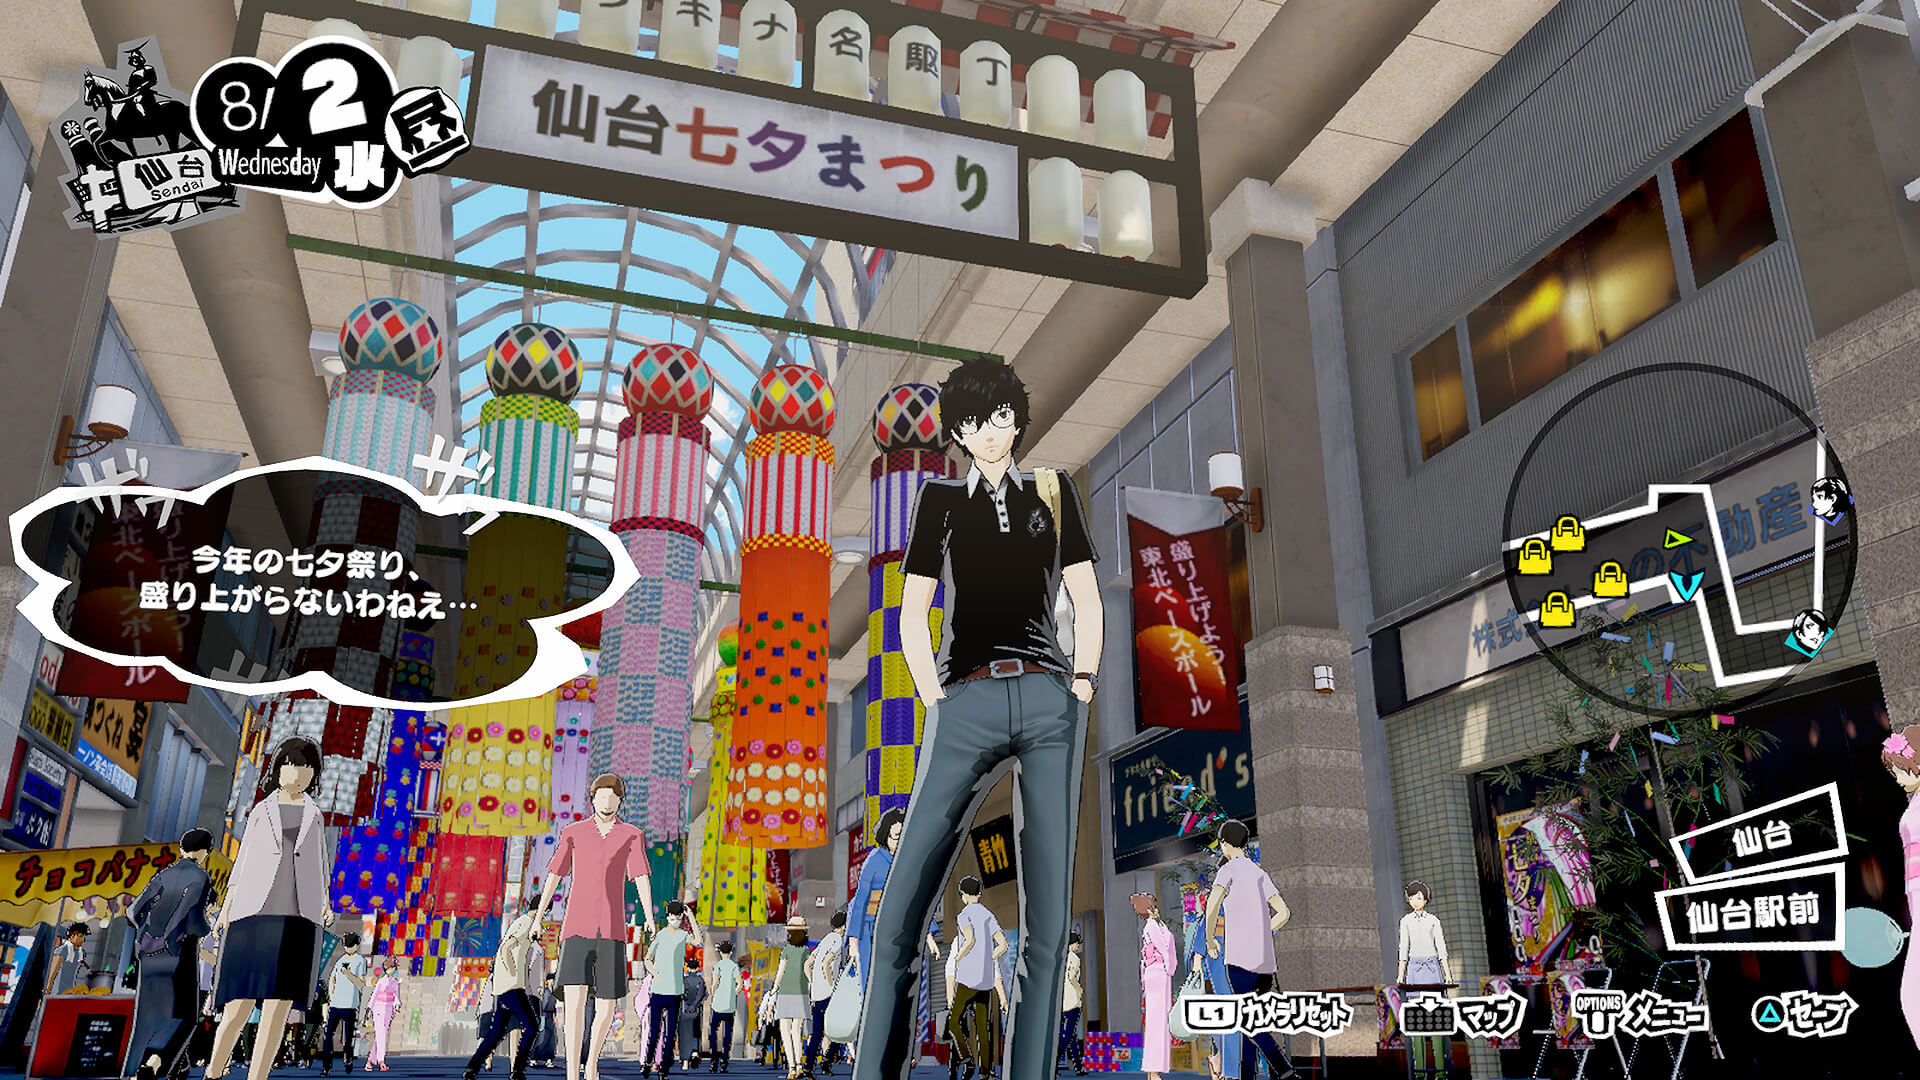 Persona 5 Scramble releasing on February 20th 2020 in Japan, new trailer and ...